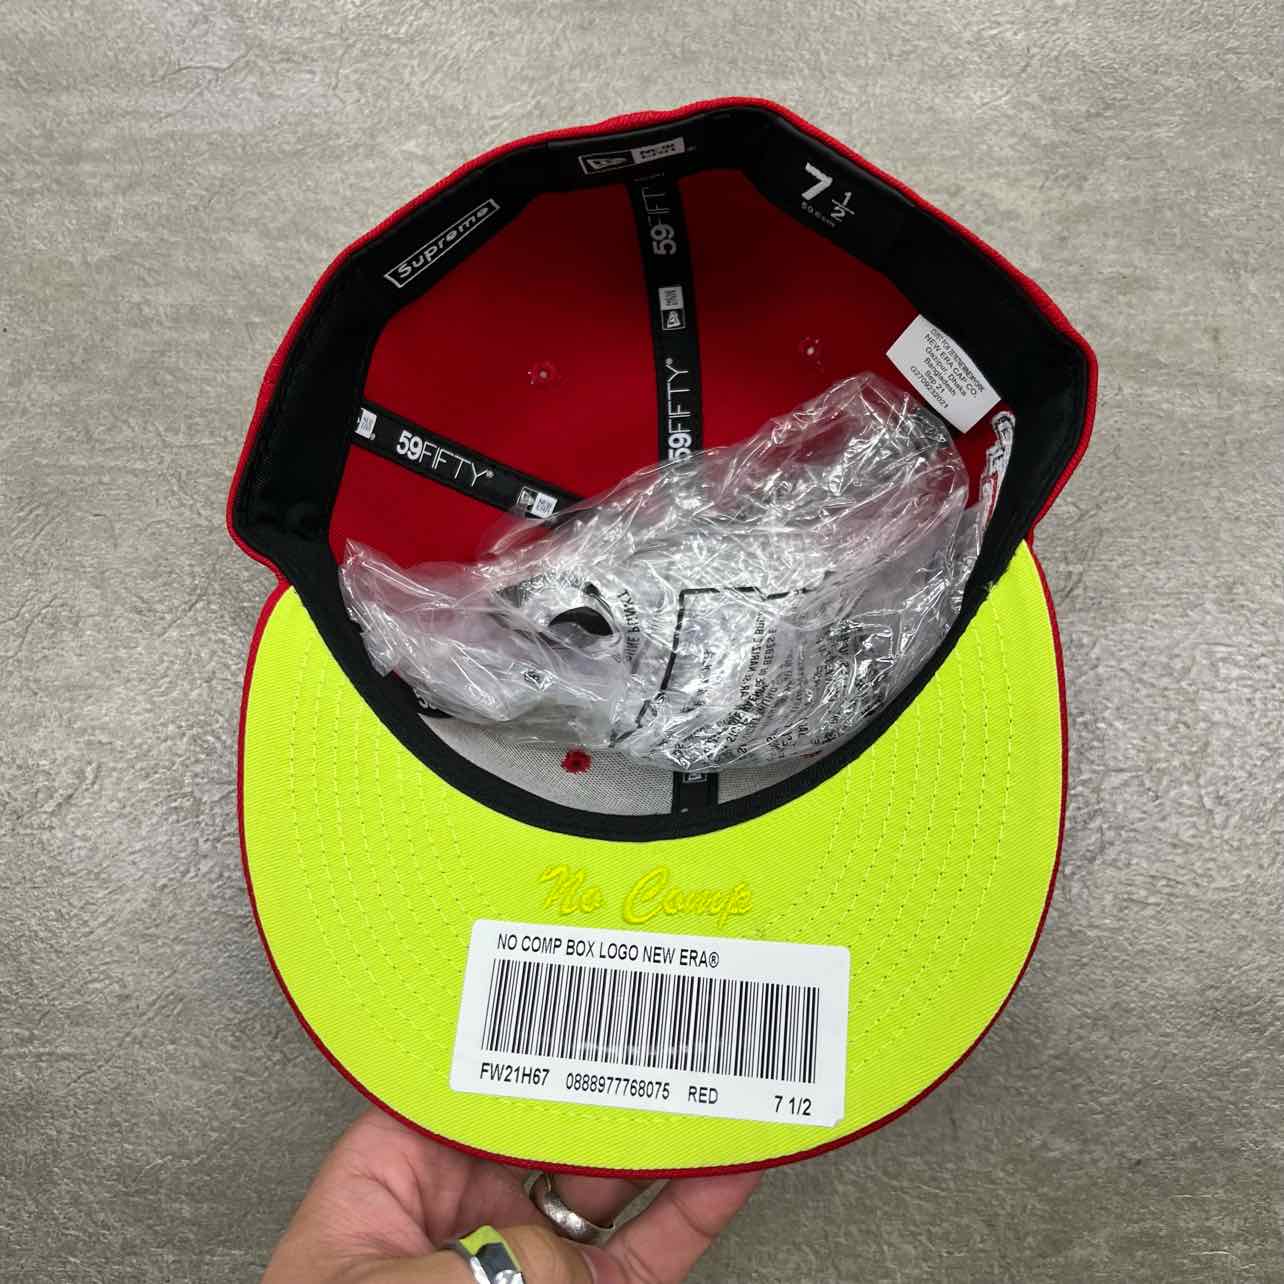 Supreme Fitted Hat &quot;NEW ERA&quot; New Red Size 7 1/2